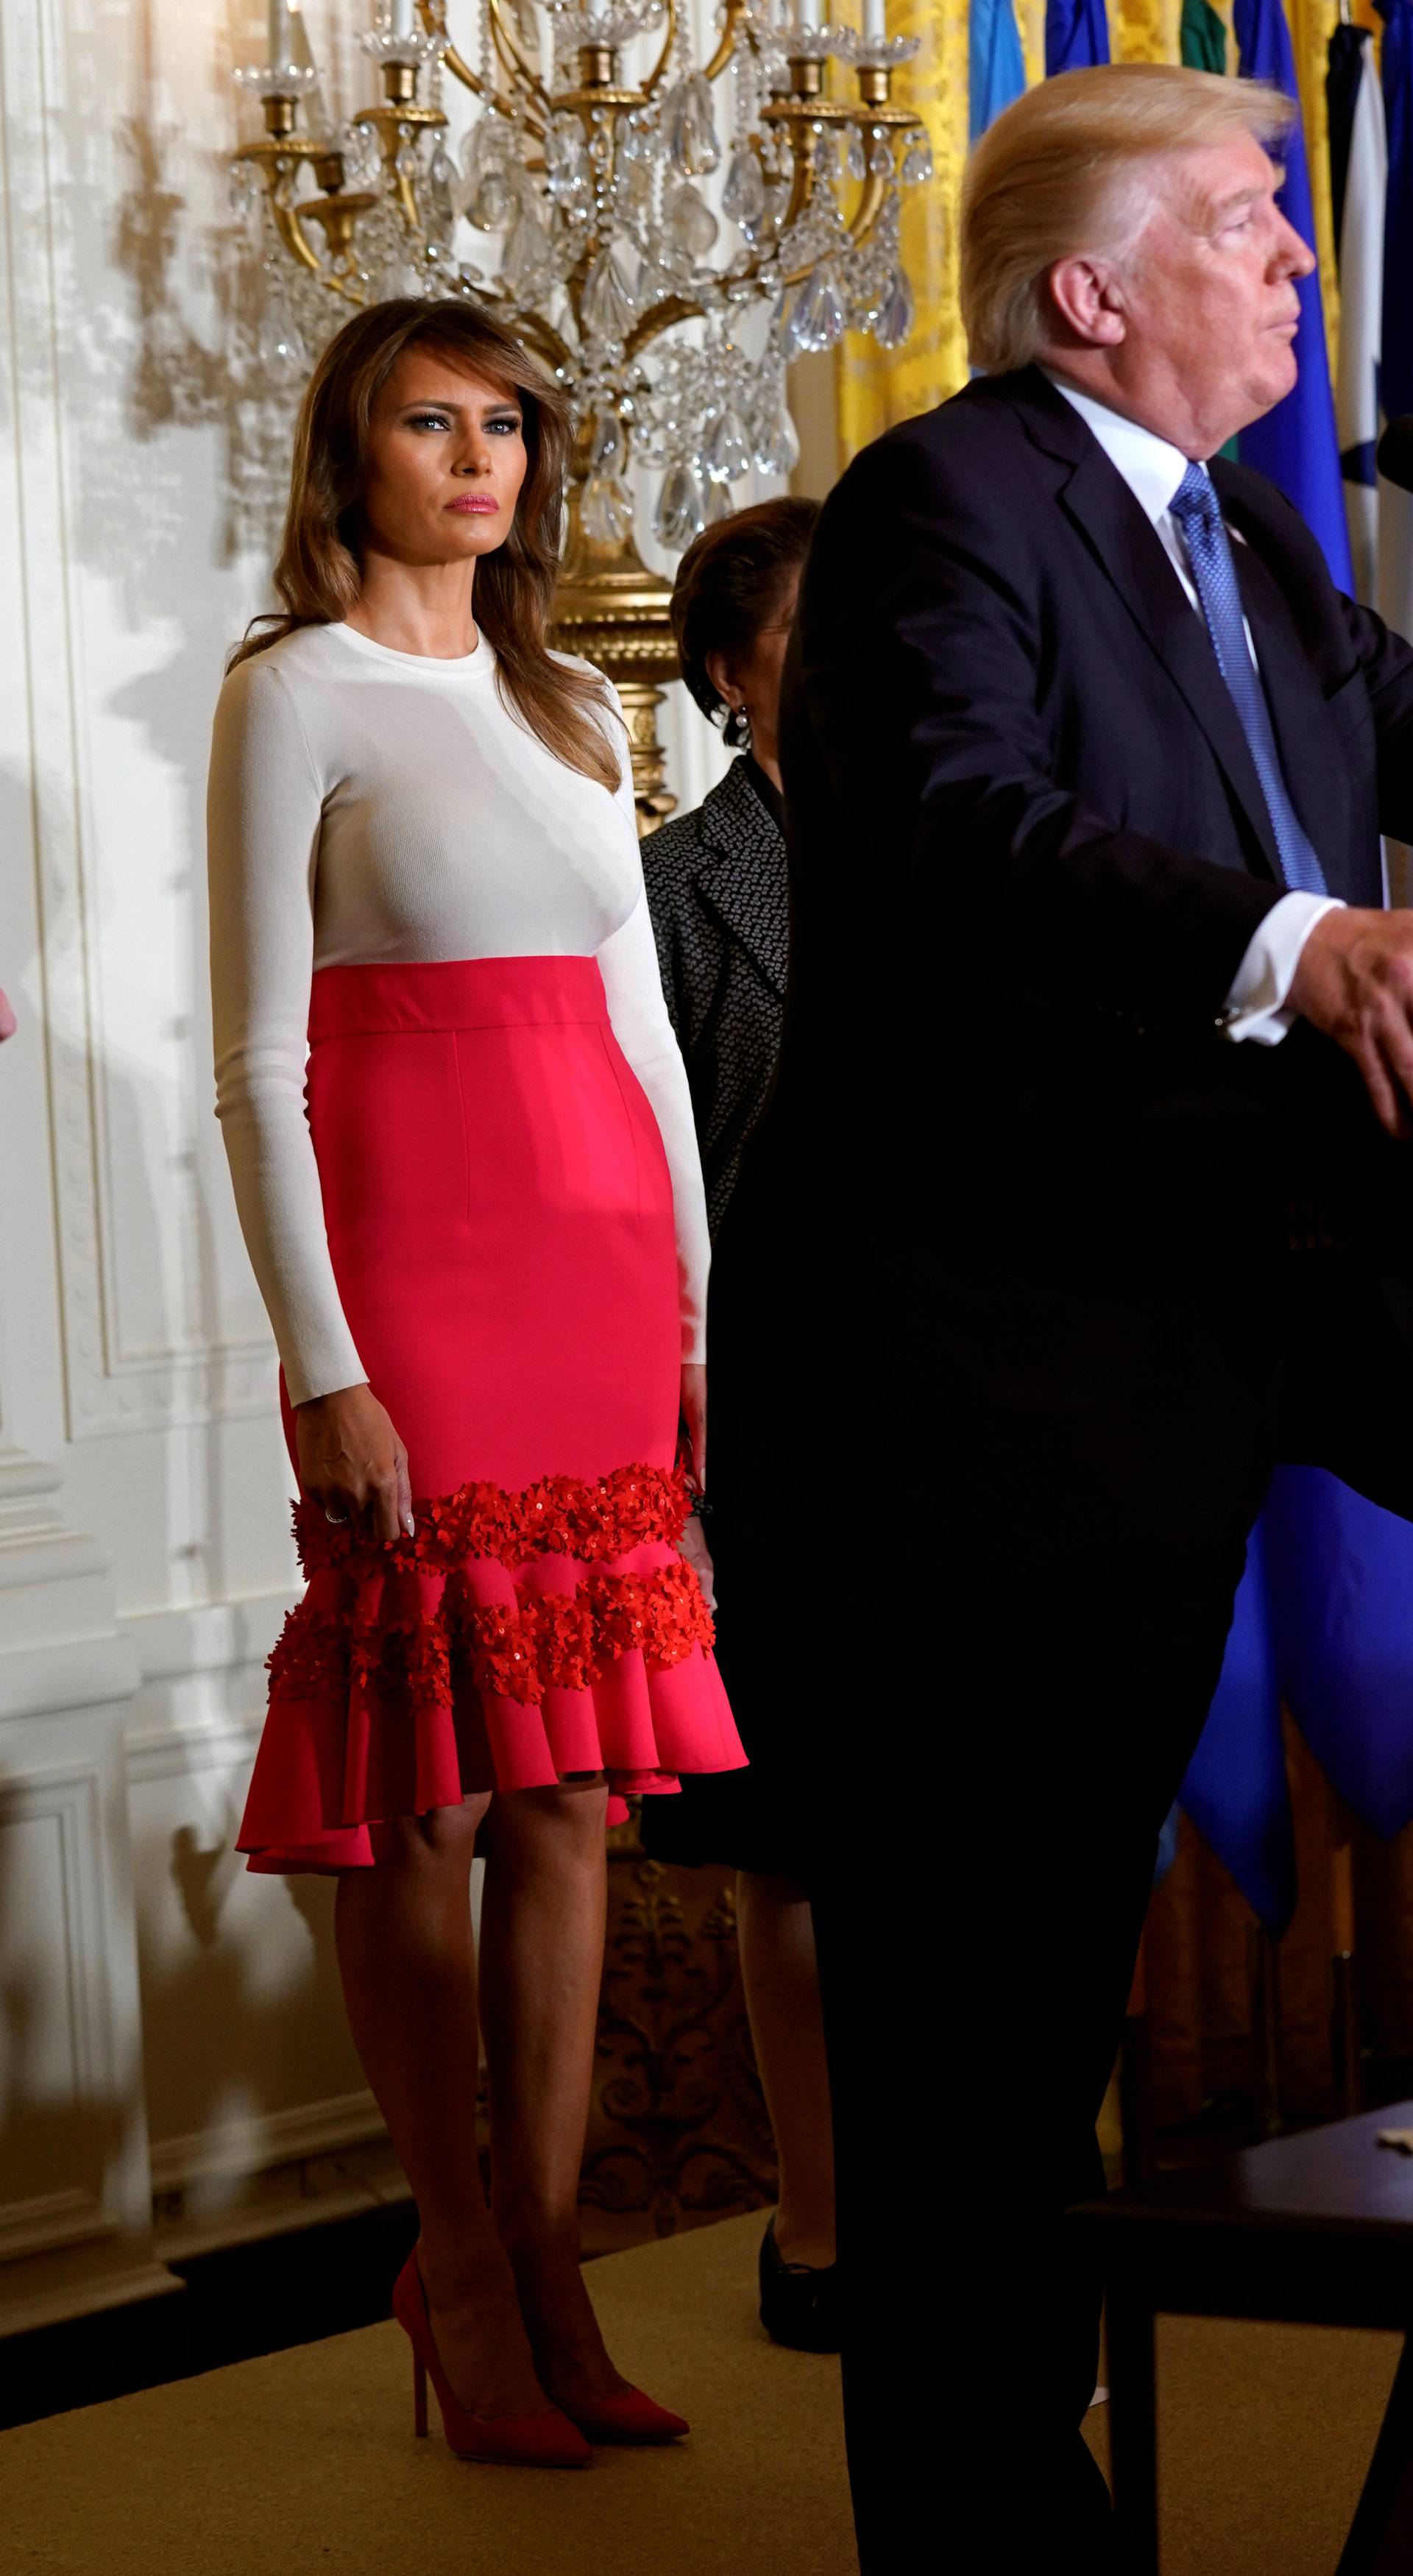 Trumps host Hispanic Heritage Month event at the White House in Washington